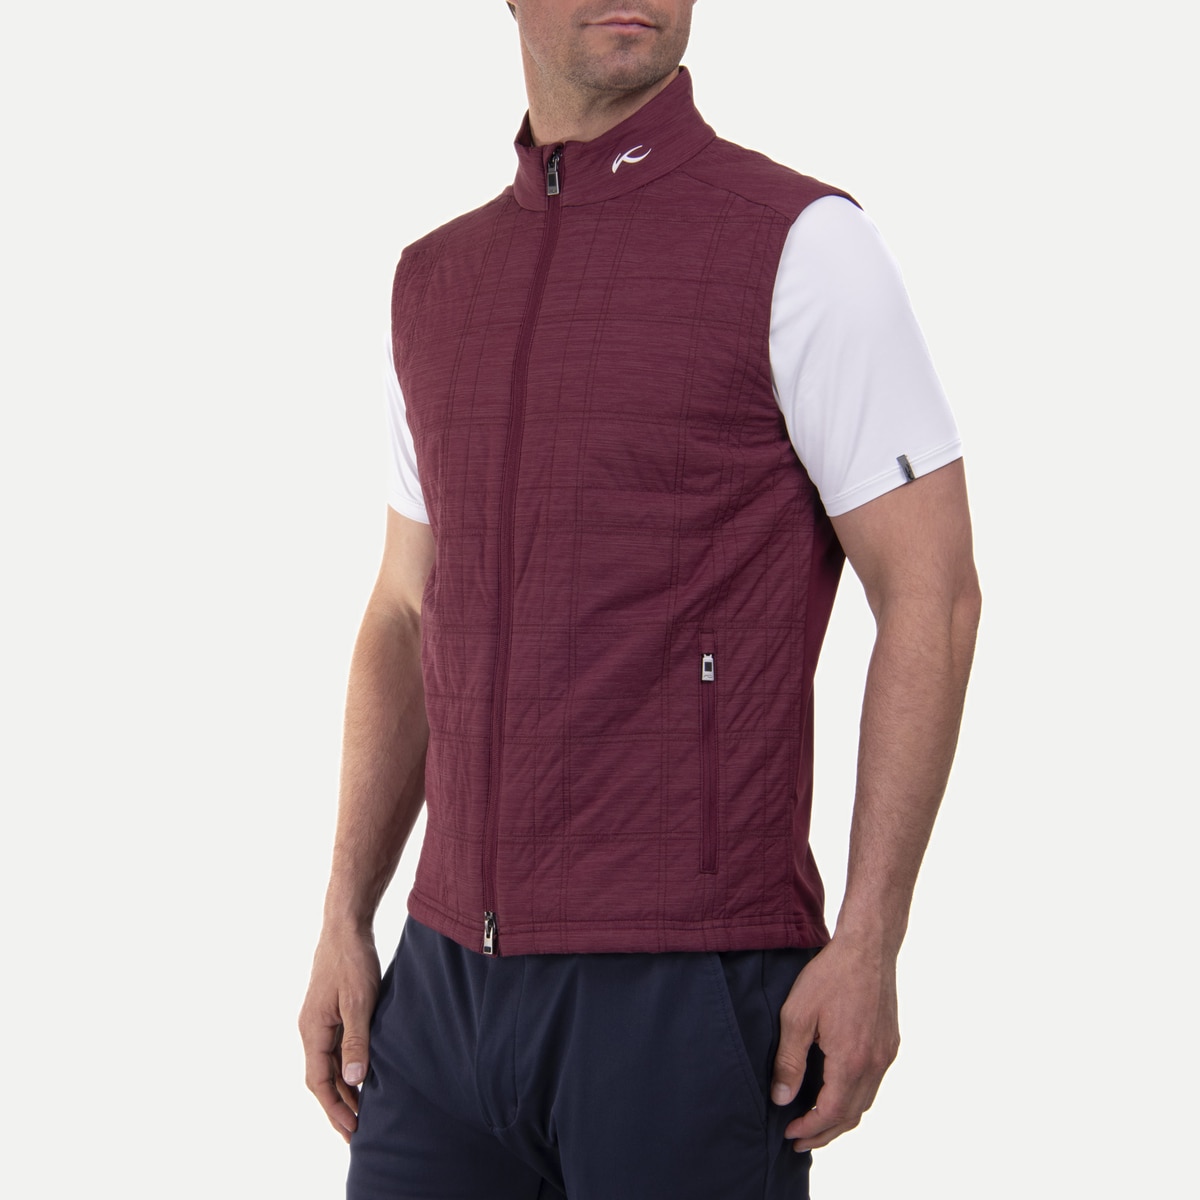 Reason Clothing Men's Luther Utility Vest